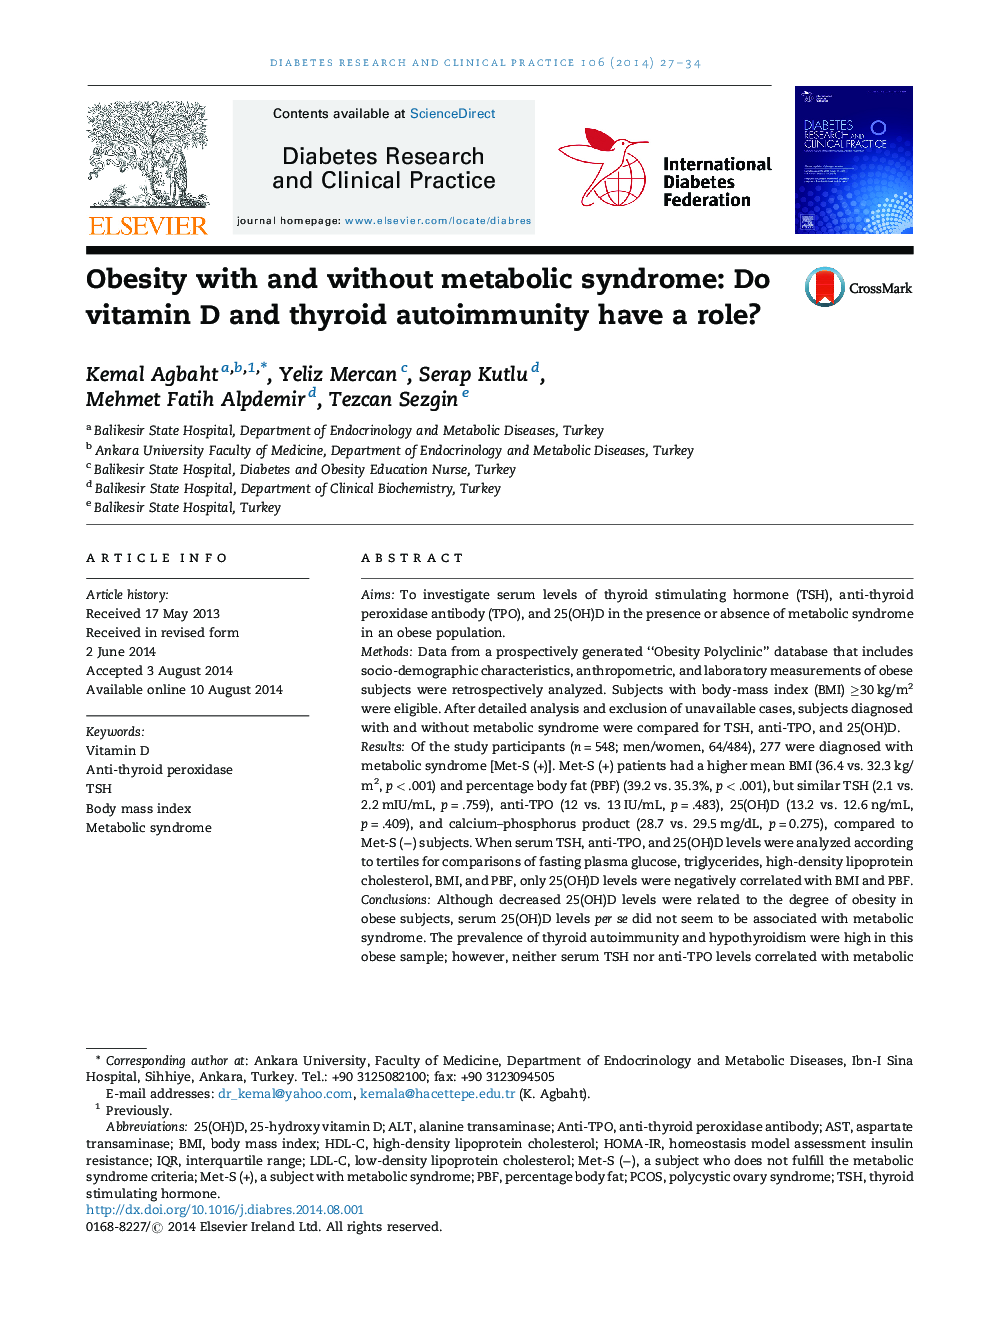 Obesity with and without metabolic syndrome: Do vitamin D and thyroid autoimmunity have a role?